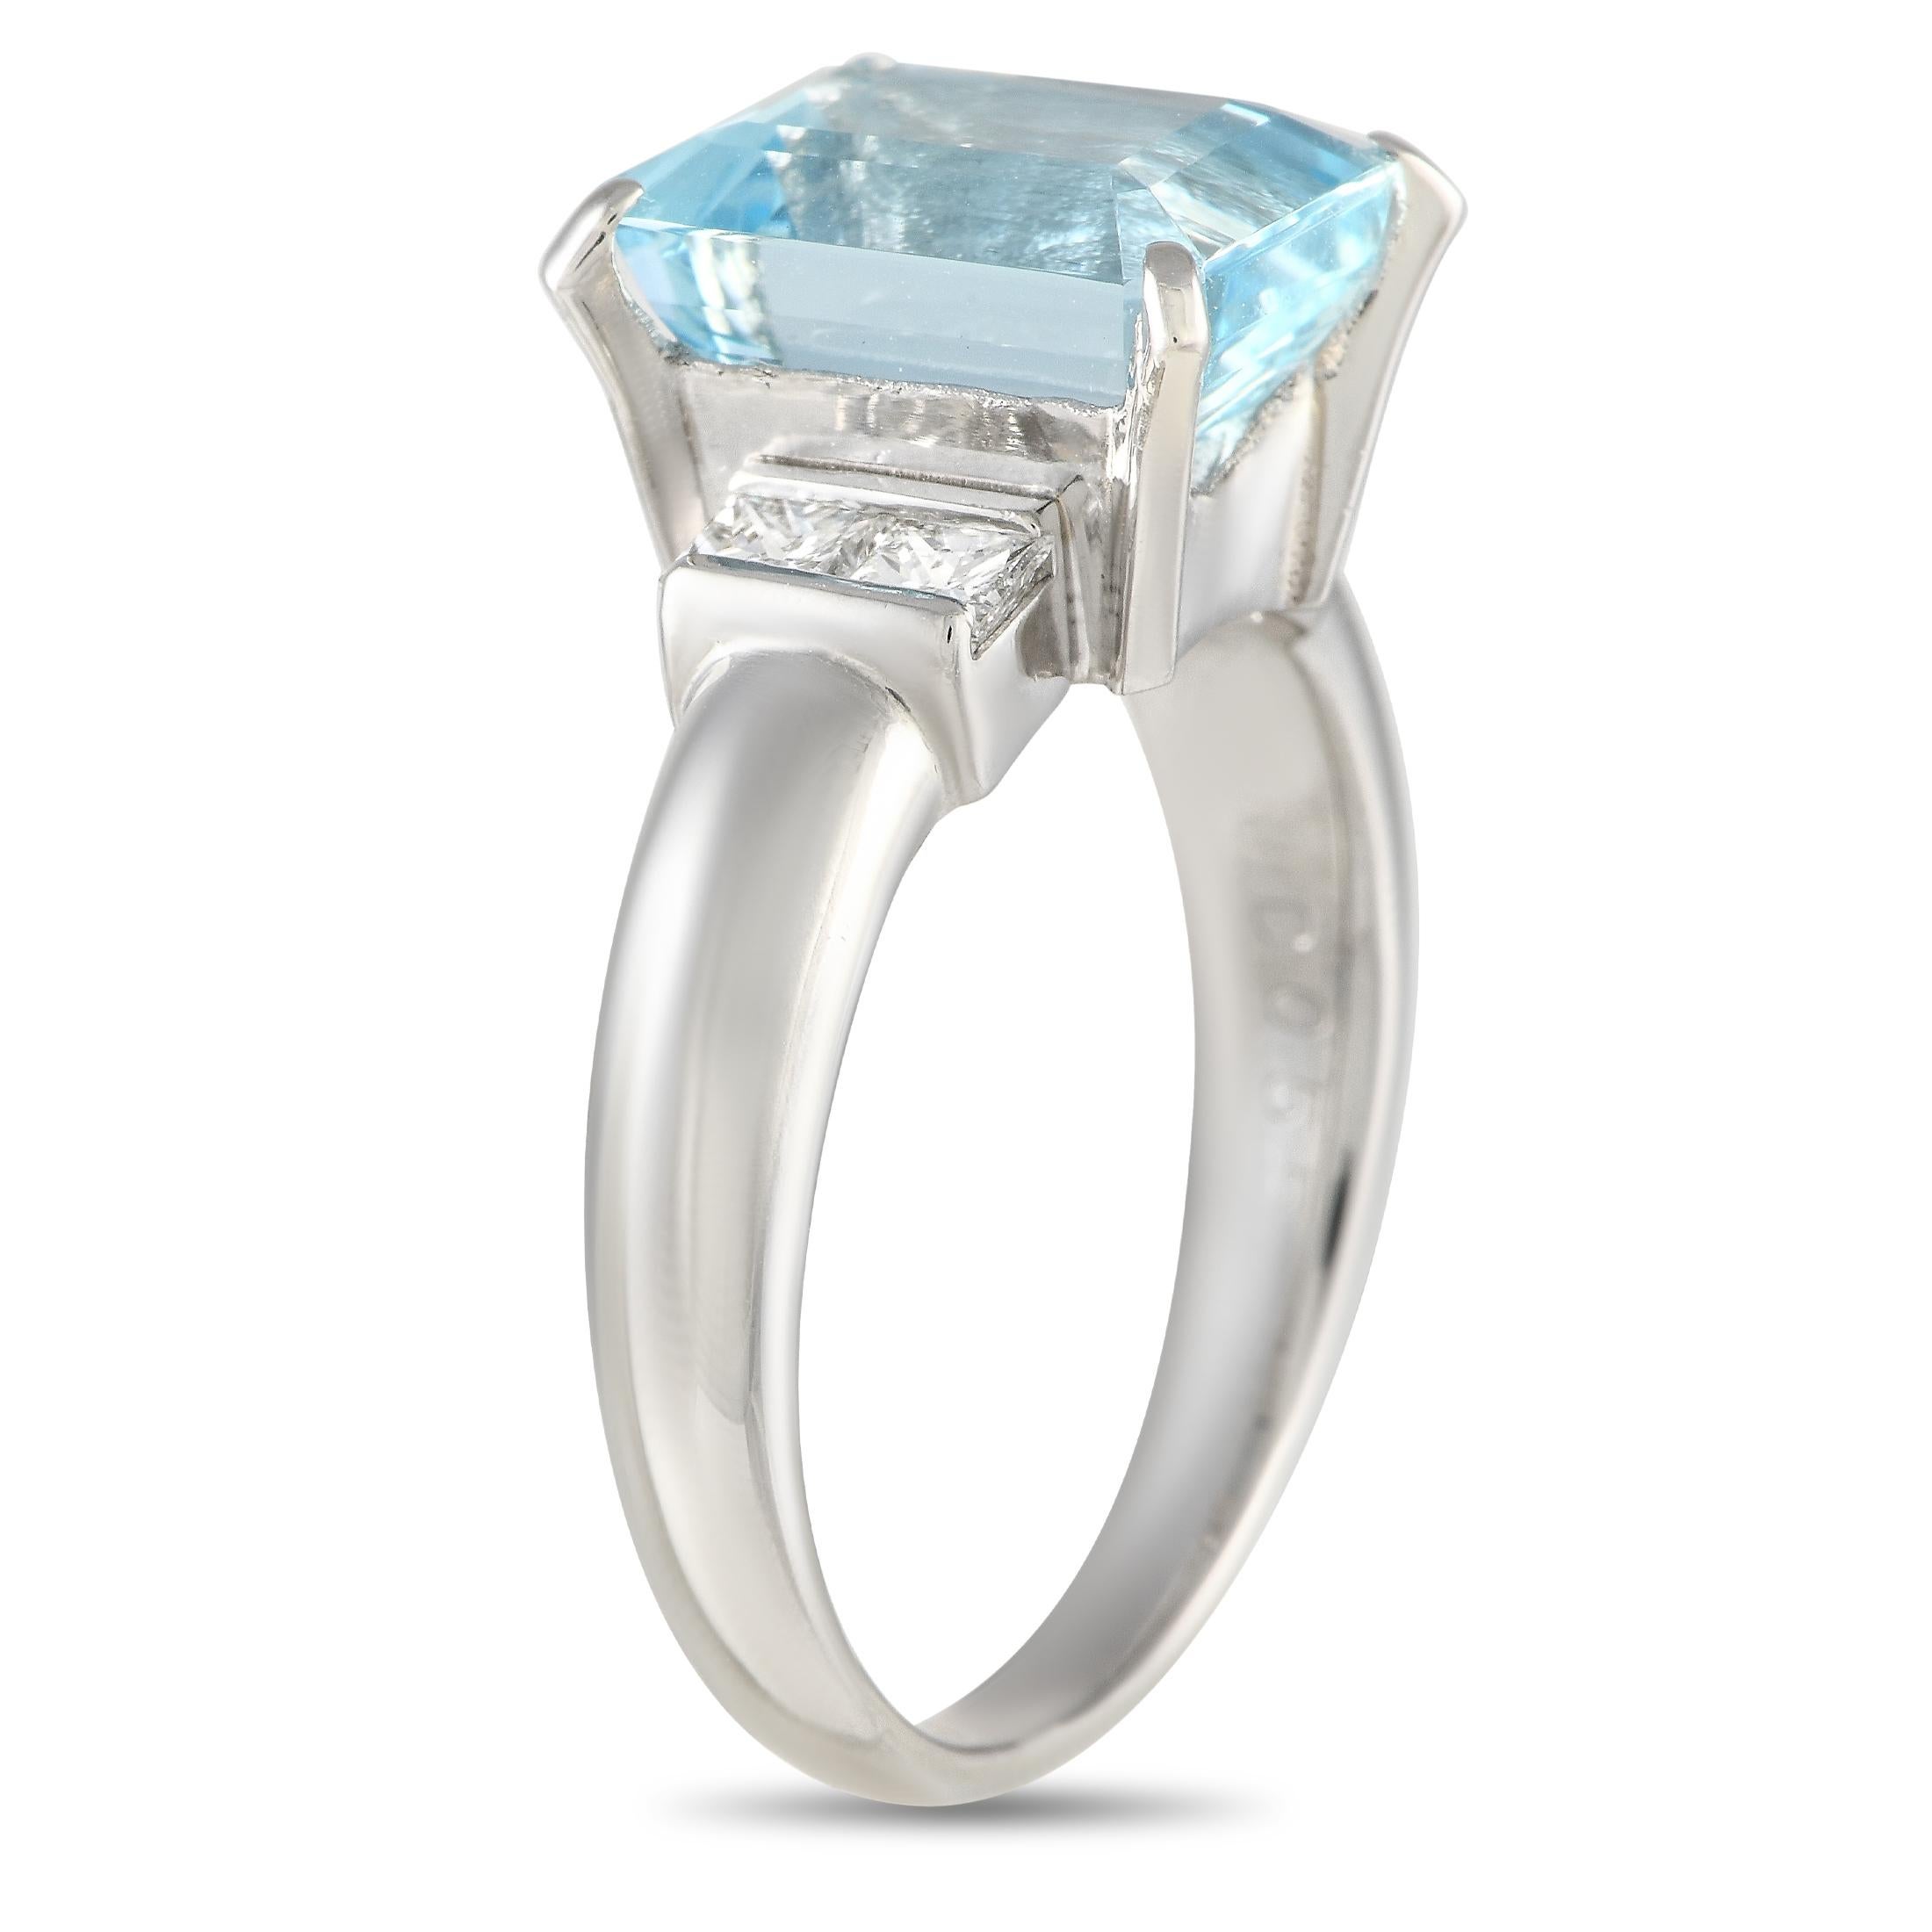 A simple Platinum setting provides the perfect foundation for this luxurious ring. The captivating 4.49 Aquamarine center stone is flanked by Diamond accents with a total weight of 0.55 carats. This piece features a 3mm band width and an 8mm top